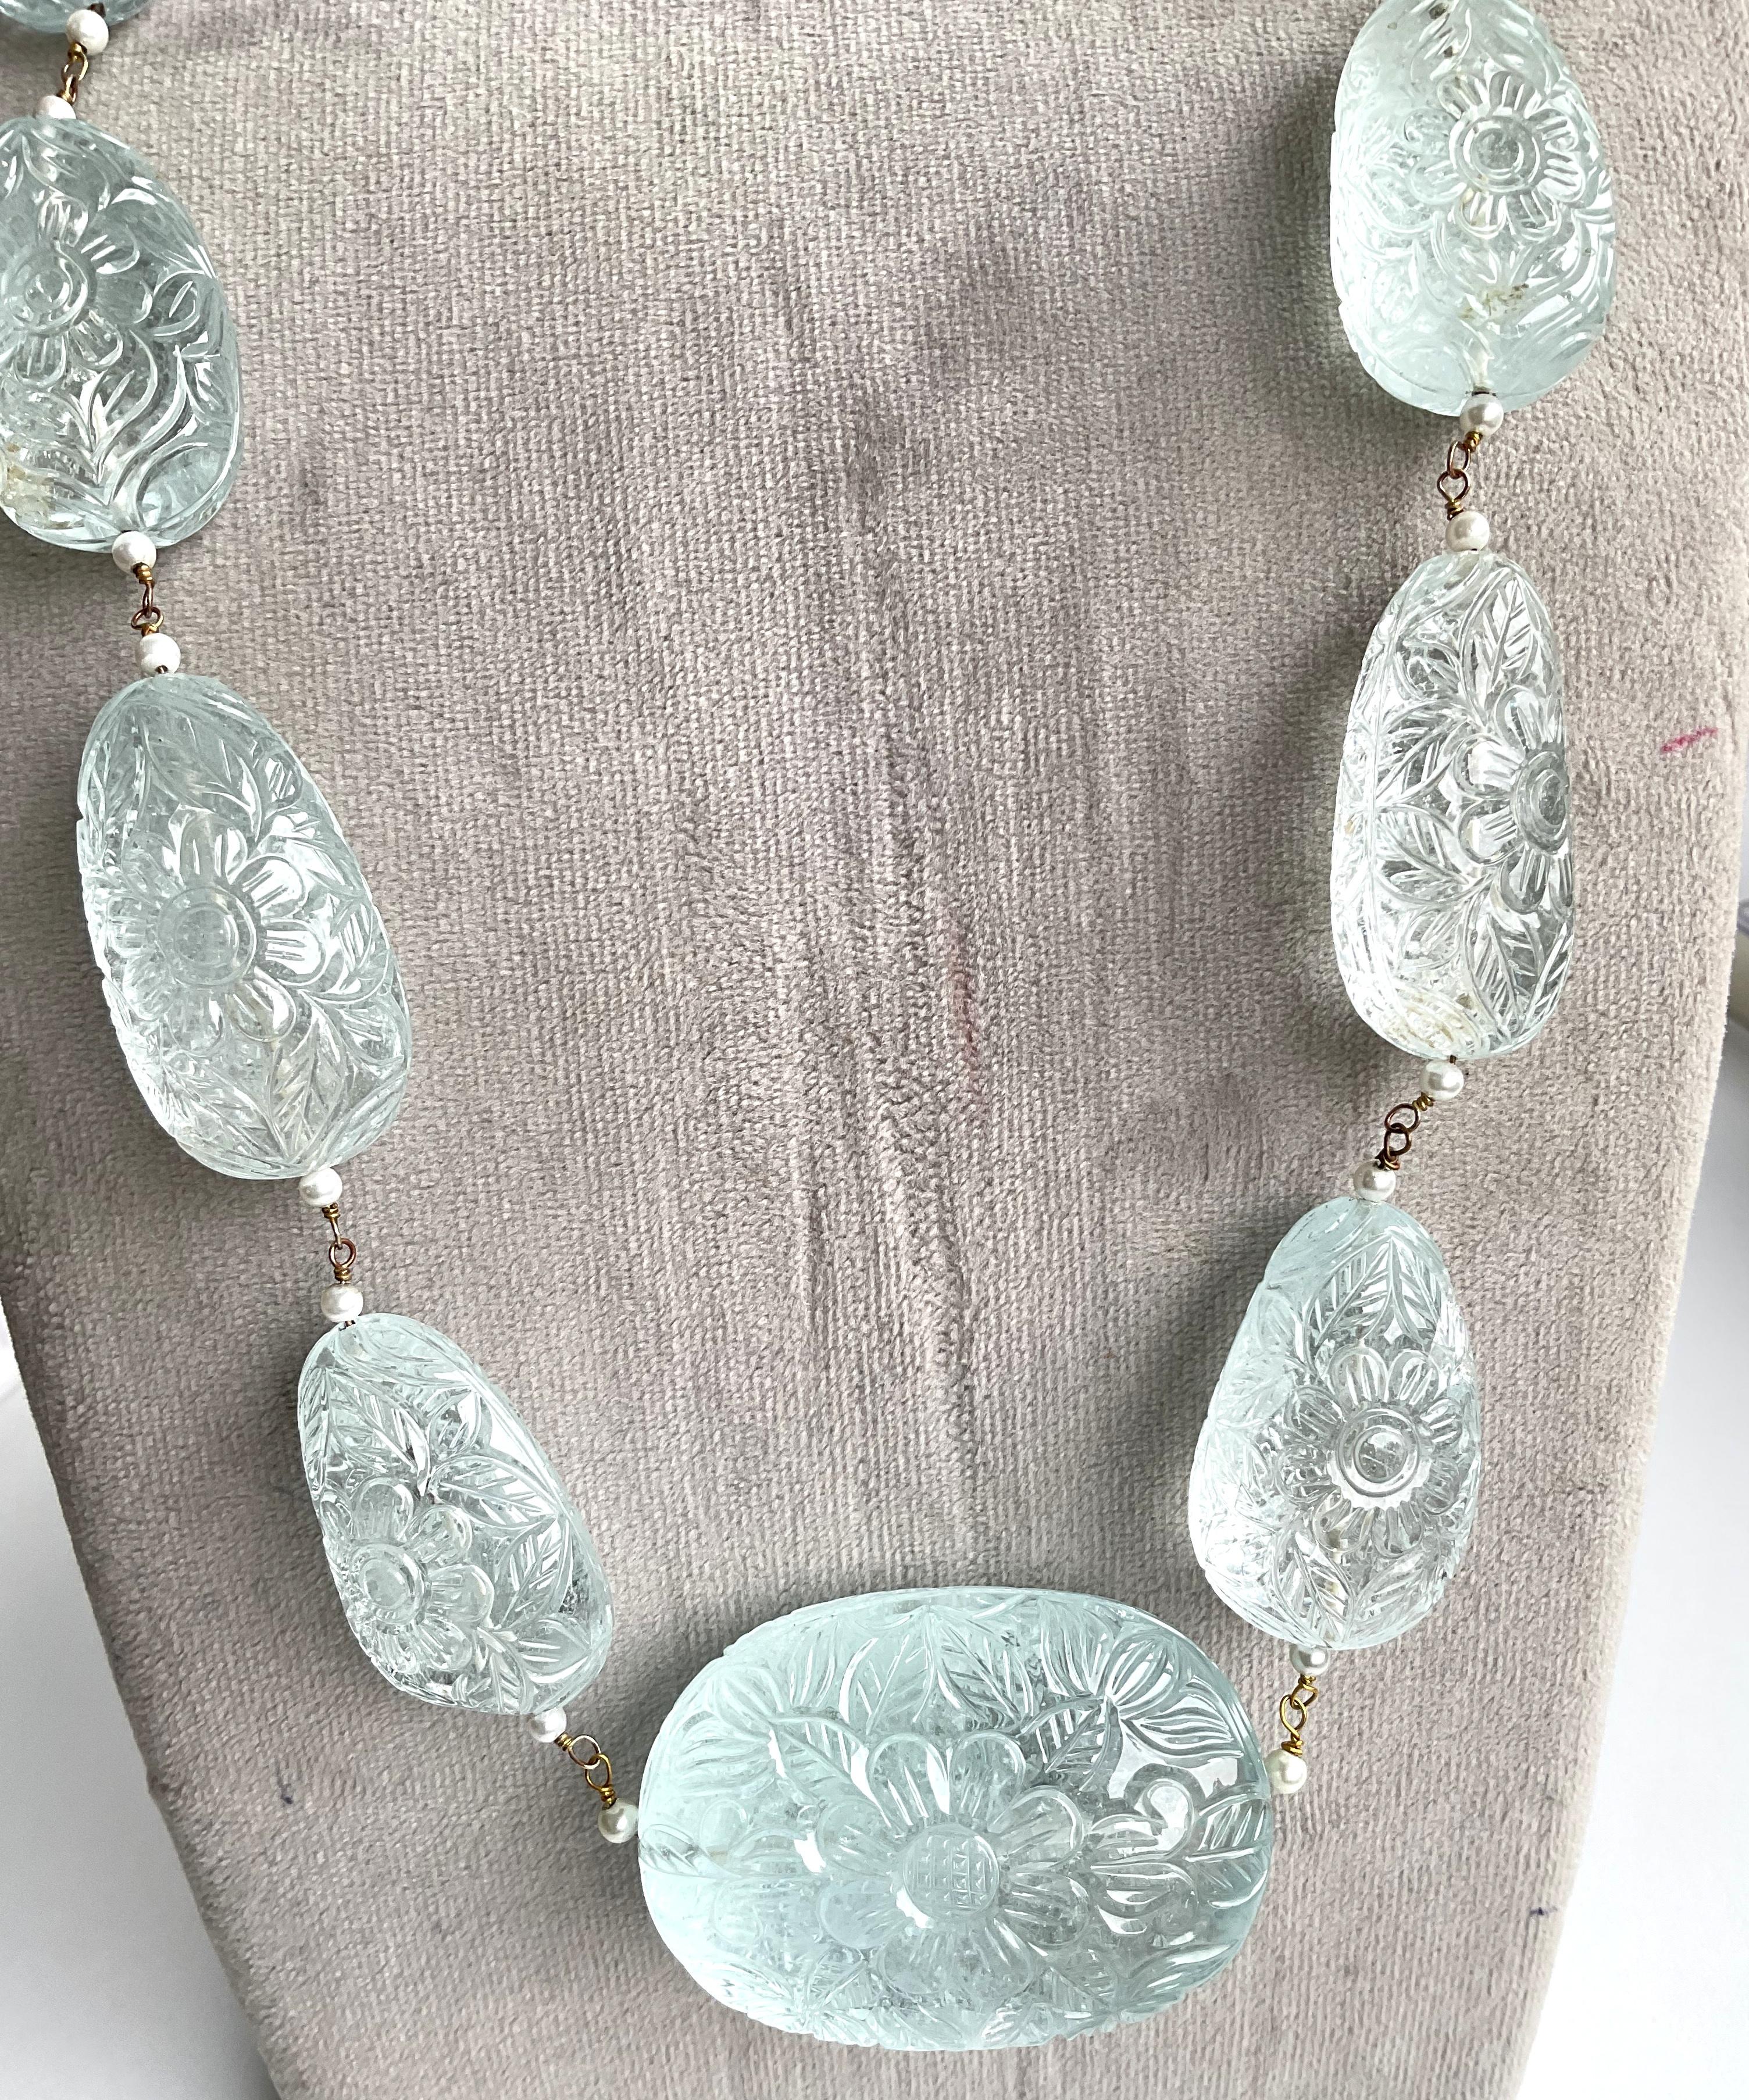 Art Deco 1828.70 Carats Aquamarine Carved Tumbled Necklace Top Quality Natural Gemstone For Sale